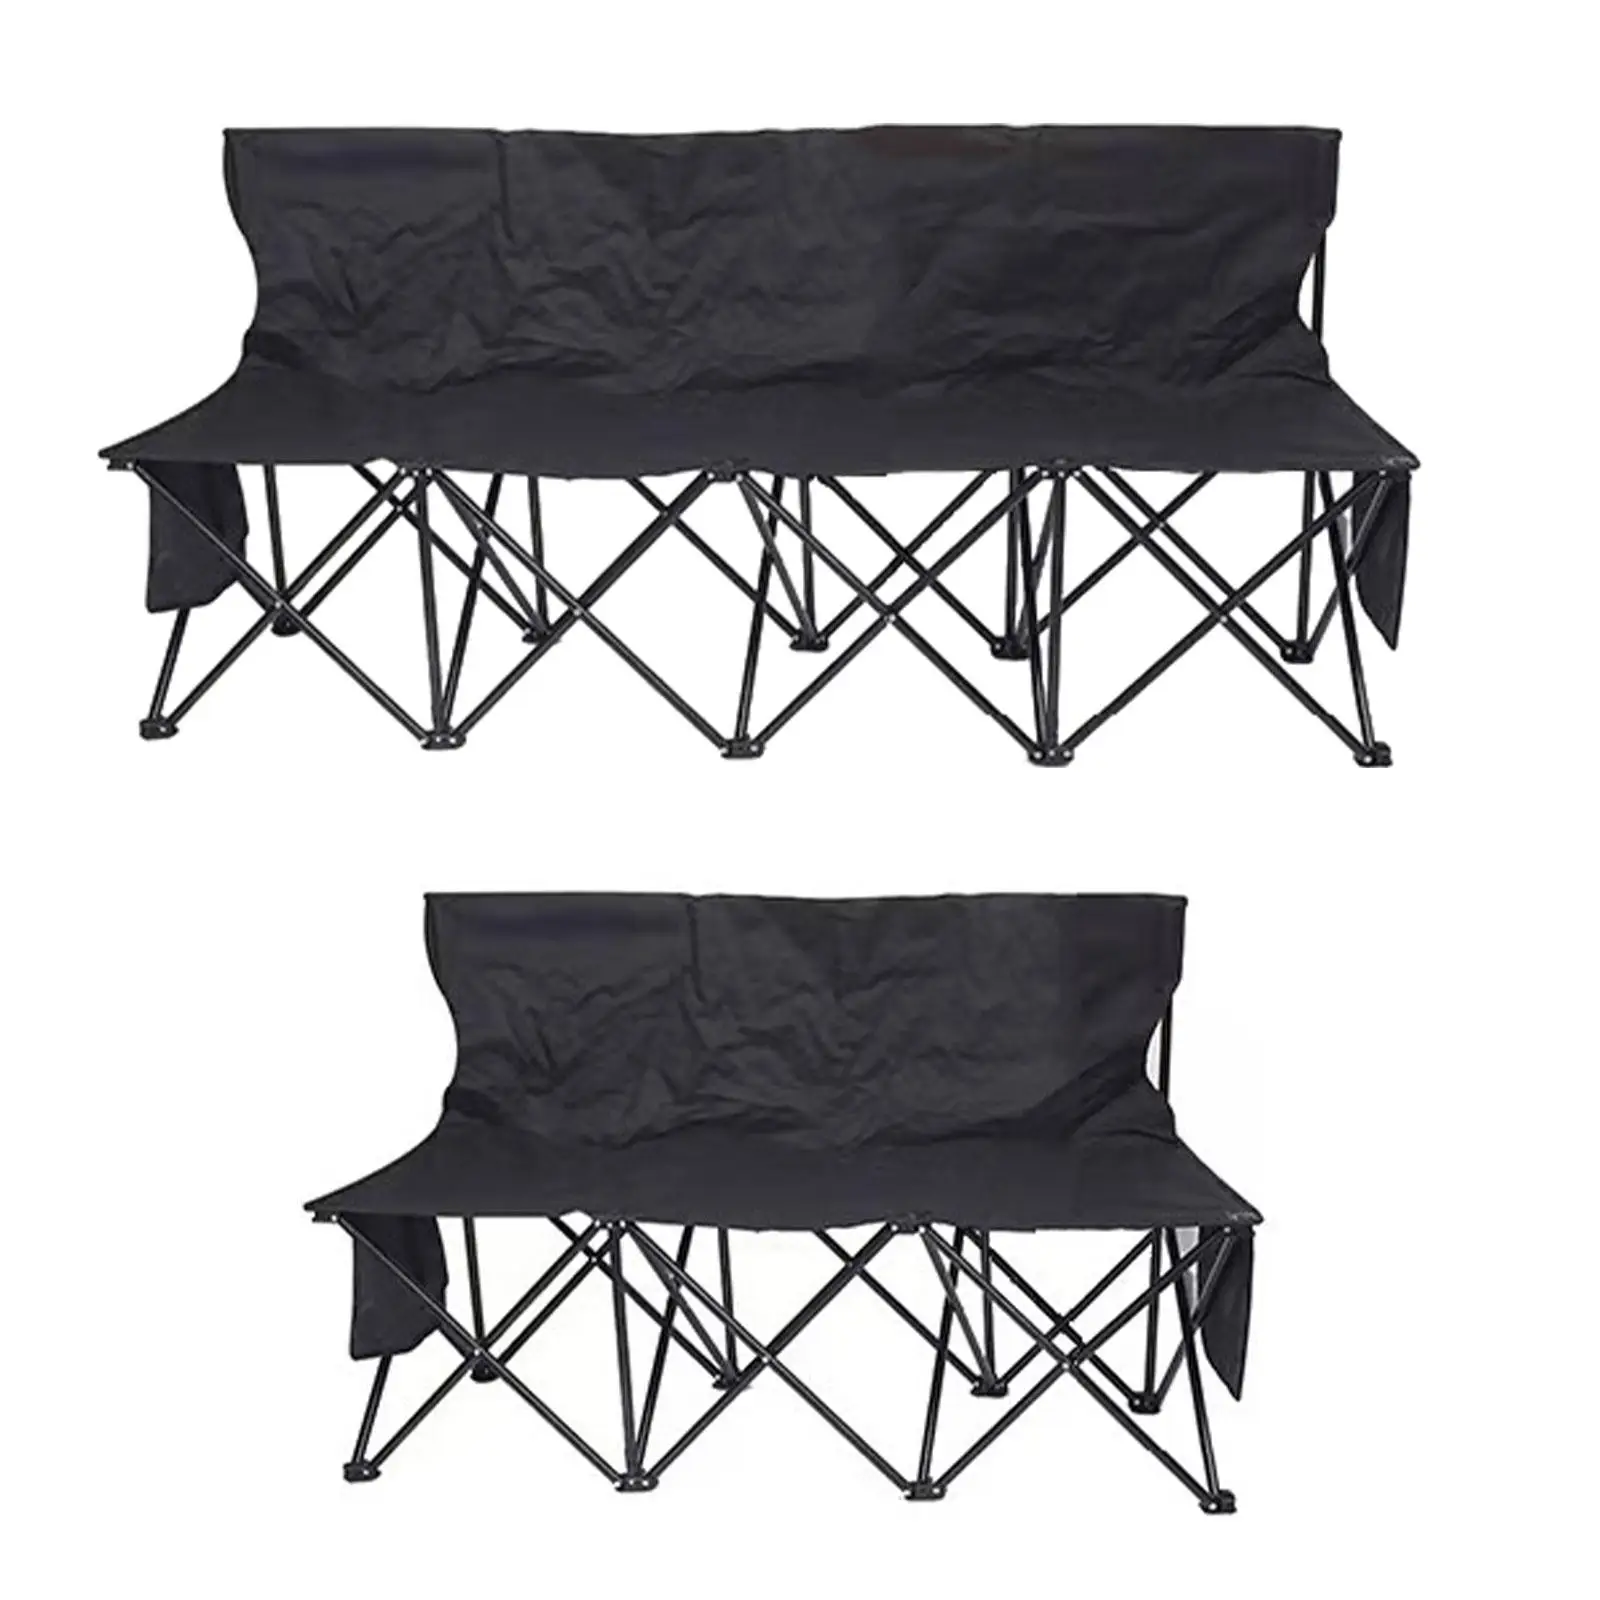 Folding Bench Seat Portable Sports Bench for Sports Team Adults Portable Sideline Bench Foldable for Picnic Events Sports